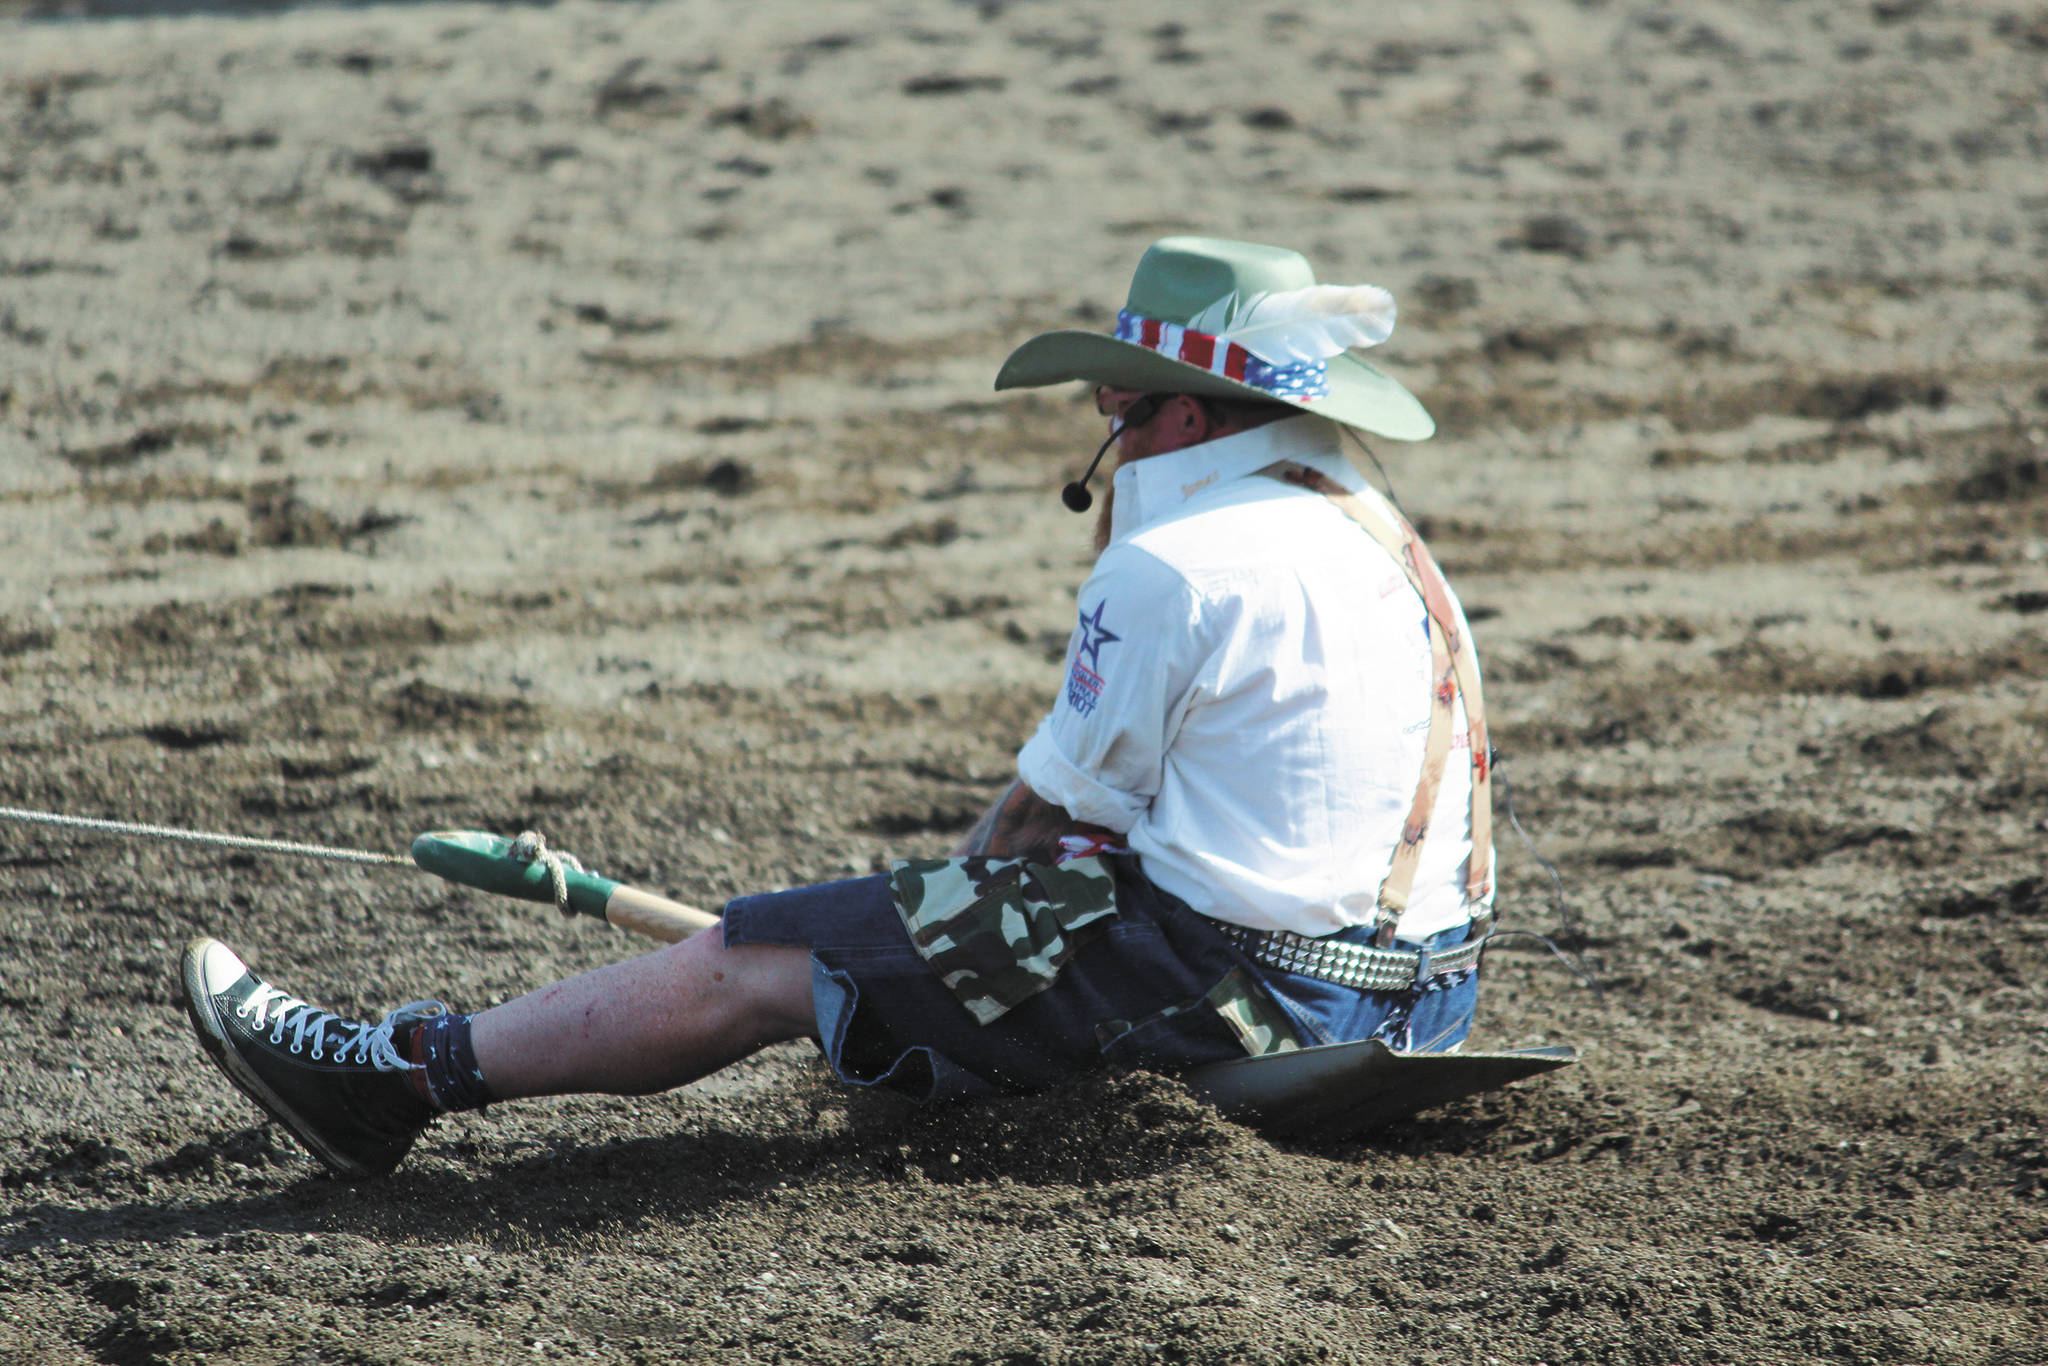 Rodeo announcer James Hastings is pulled behind a horse during the shovel race at the annual Ninilchik Rodeo on Saturday, July 4, 2020 at the Kenai Peninsula Fairgrounds in Ninilchik, Alaska. (Photo by Megan Pacer/Homer News)